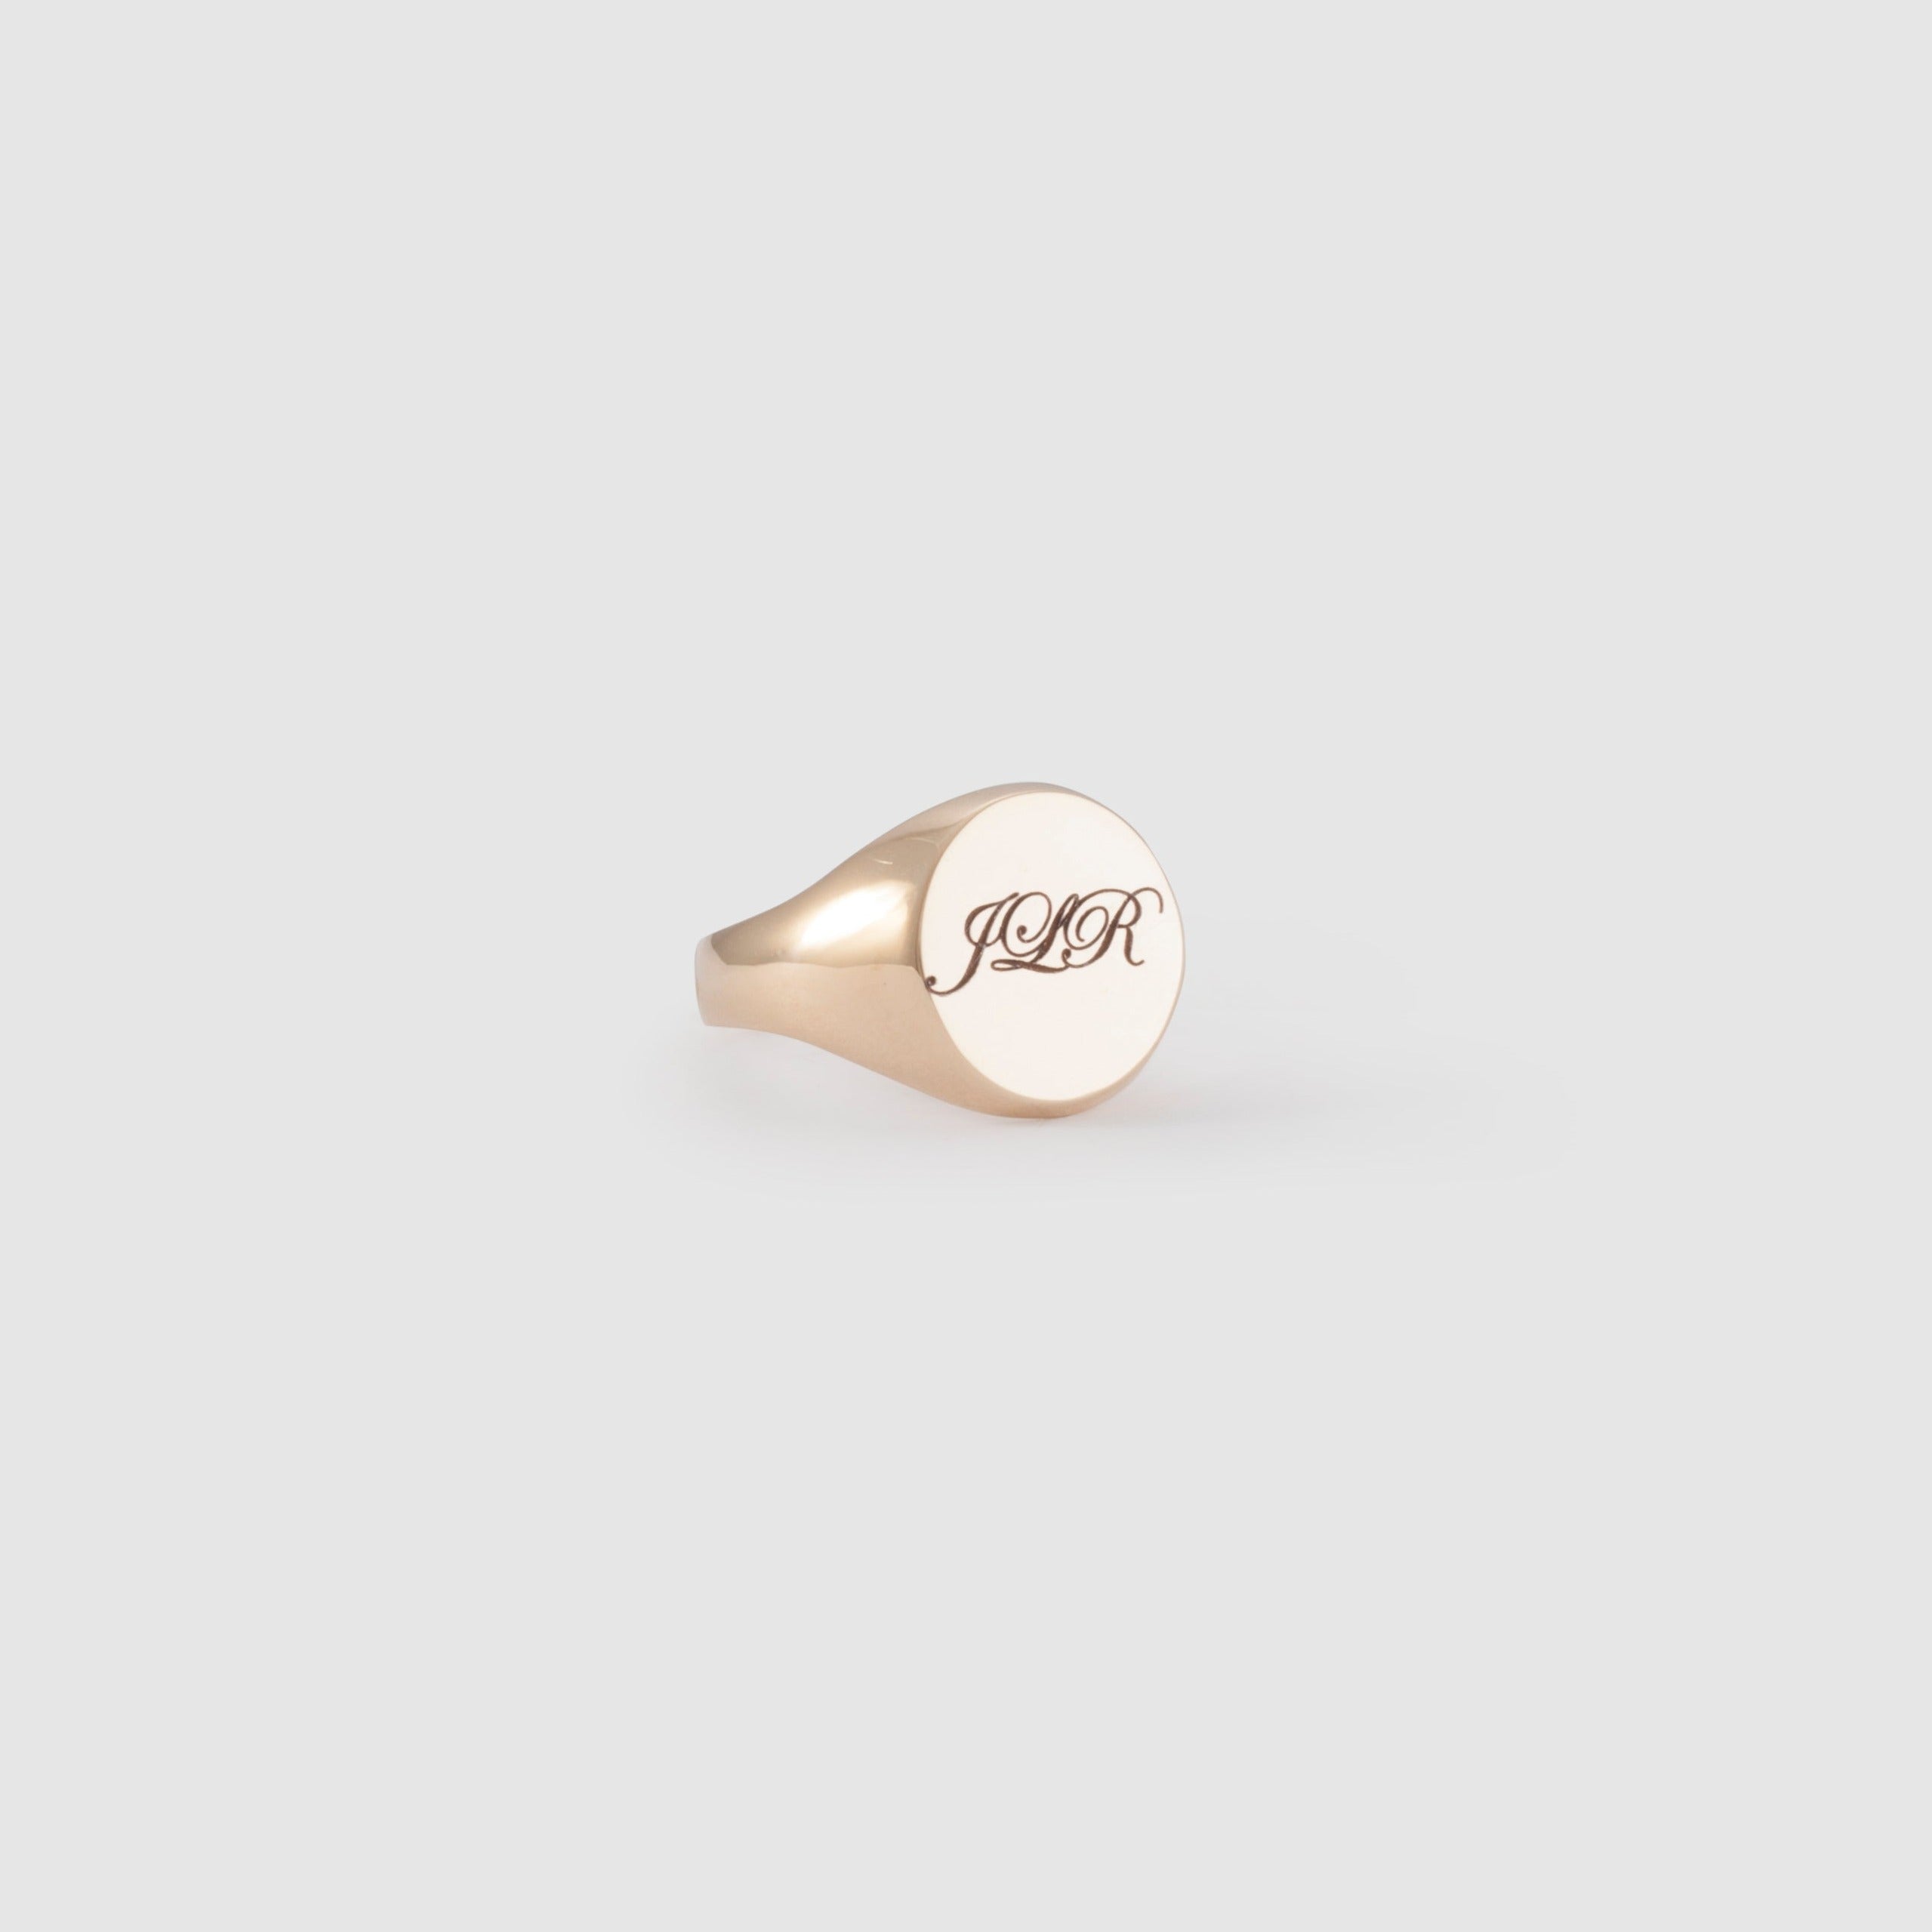 Gold round signet ring with engraving